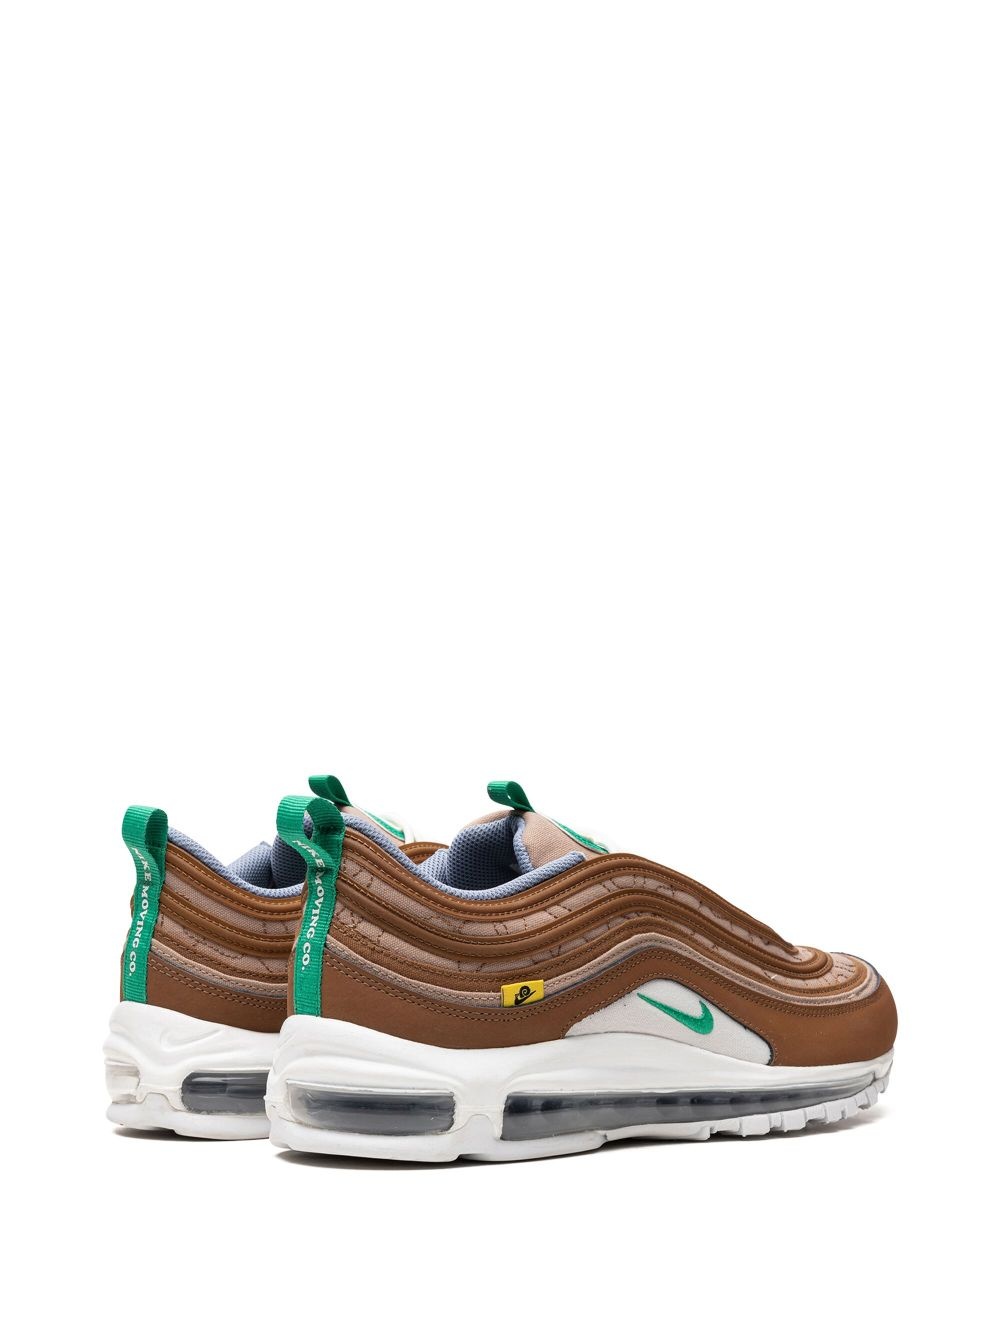 Air Max 97 SE "Moving Company" sneakers - 3